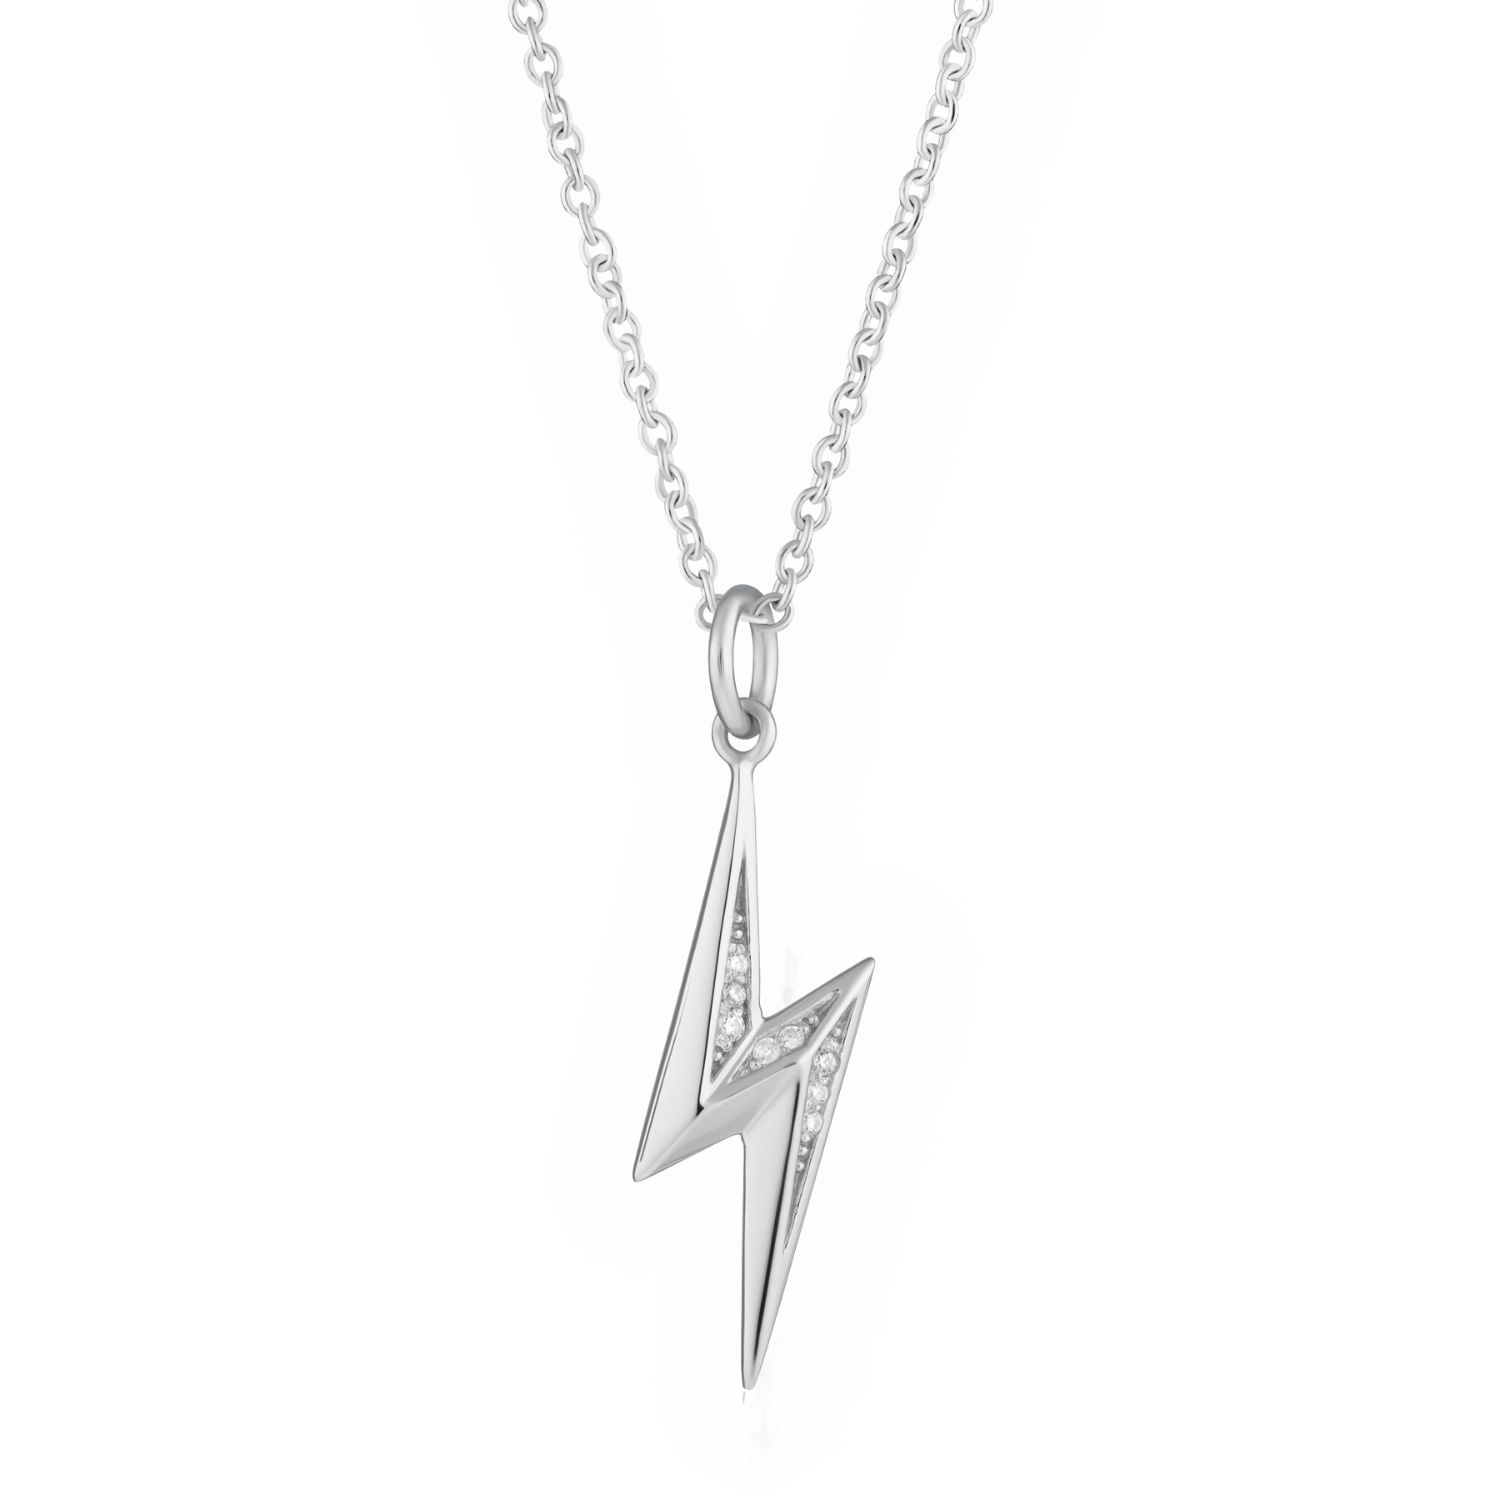 Women’s Silver Sparkling Lightning Bolt Necklace With Slider Clasp Scream Pretty